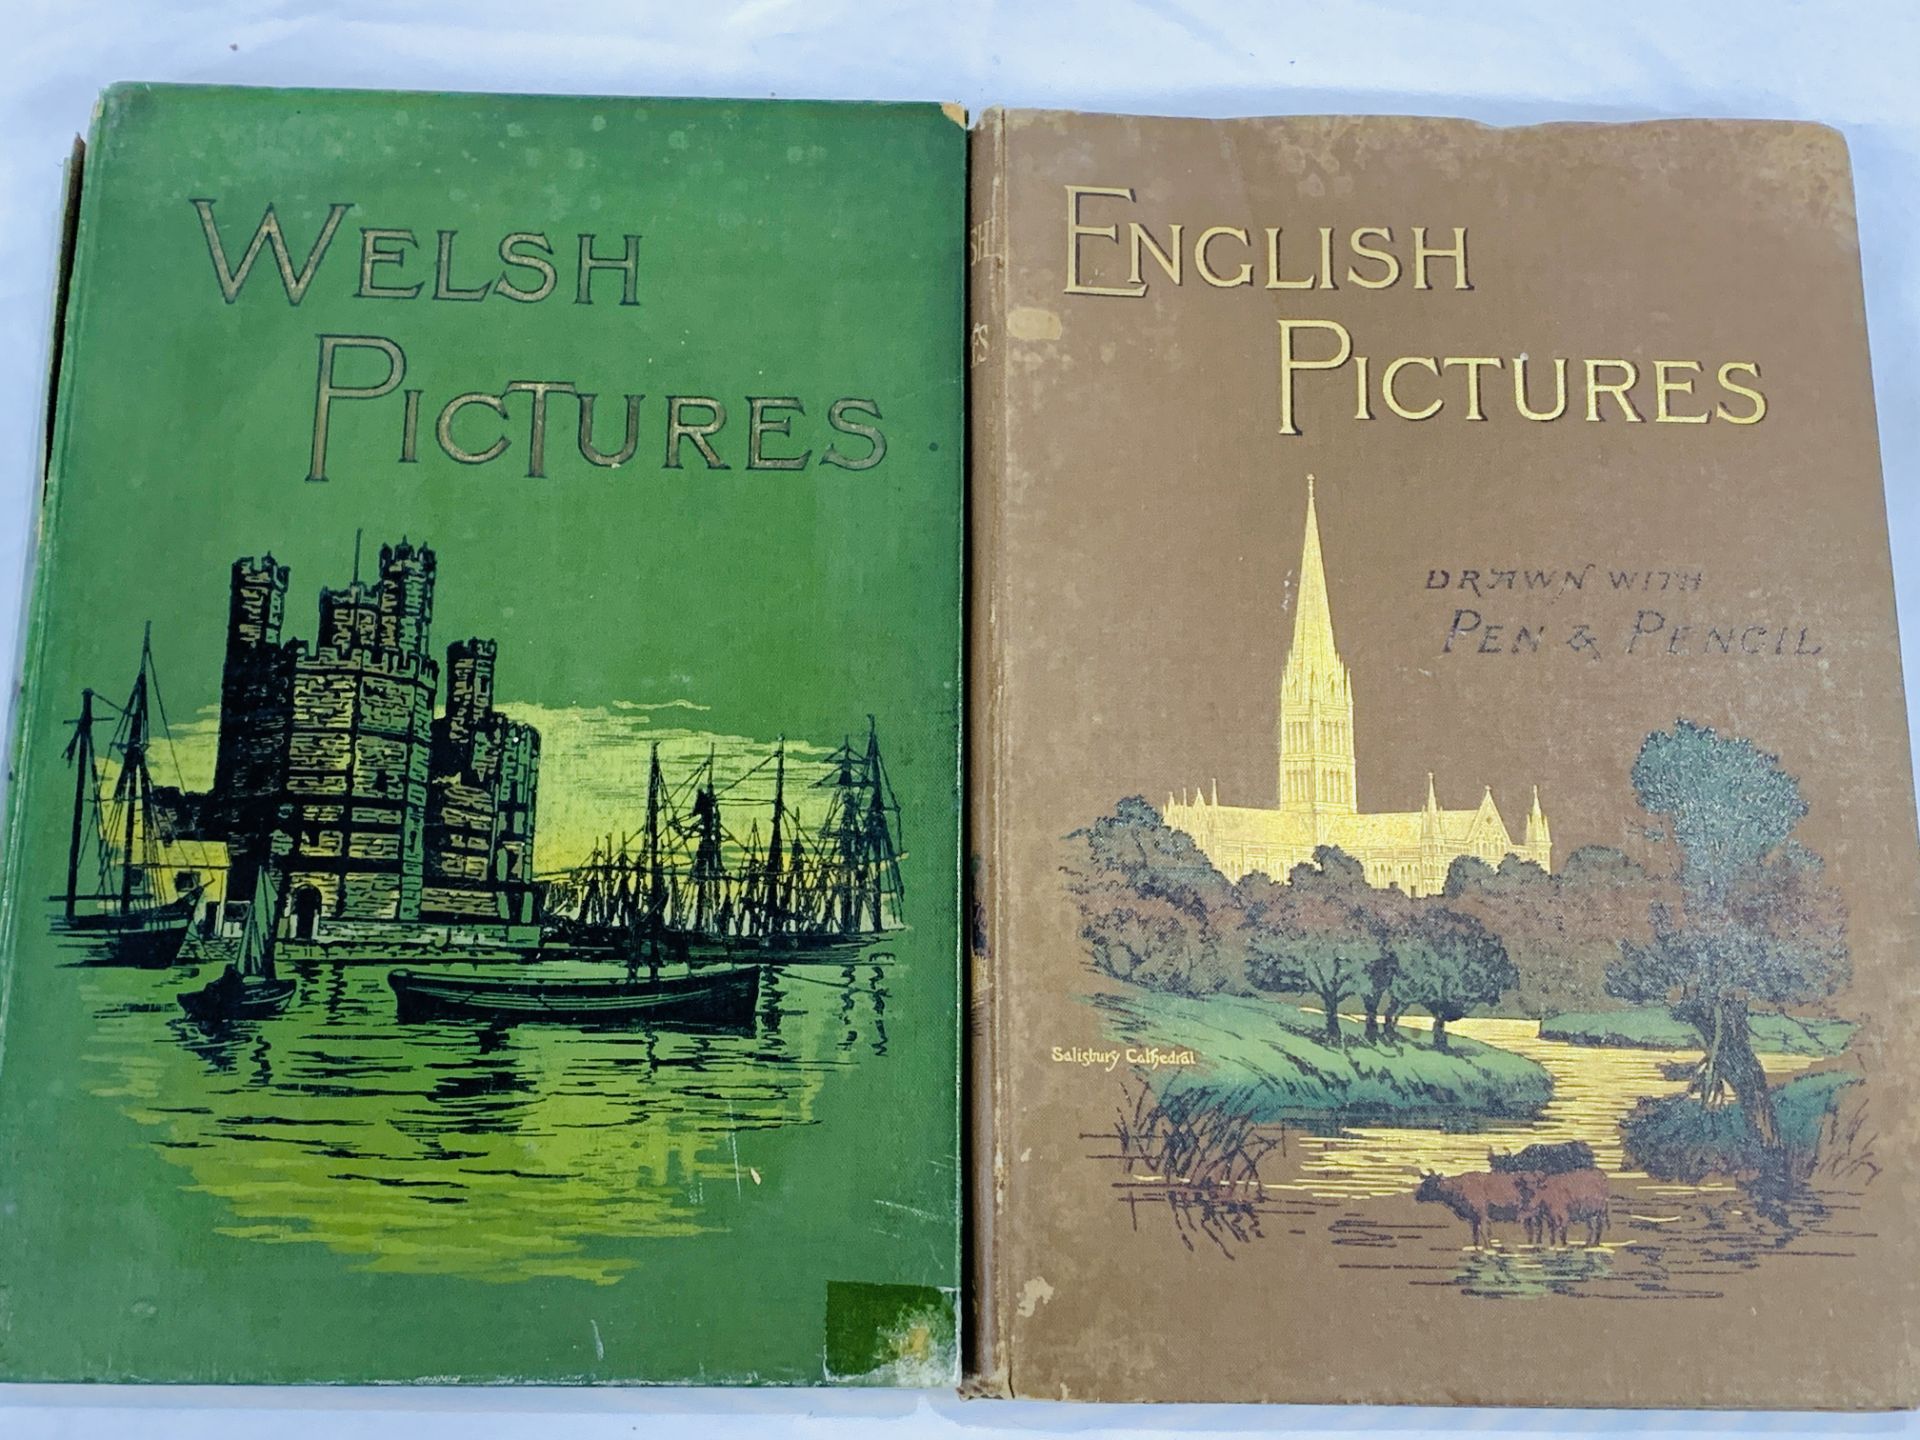 English Pictures and Welsh Pictures, 2 volumes circa 1890